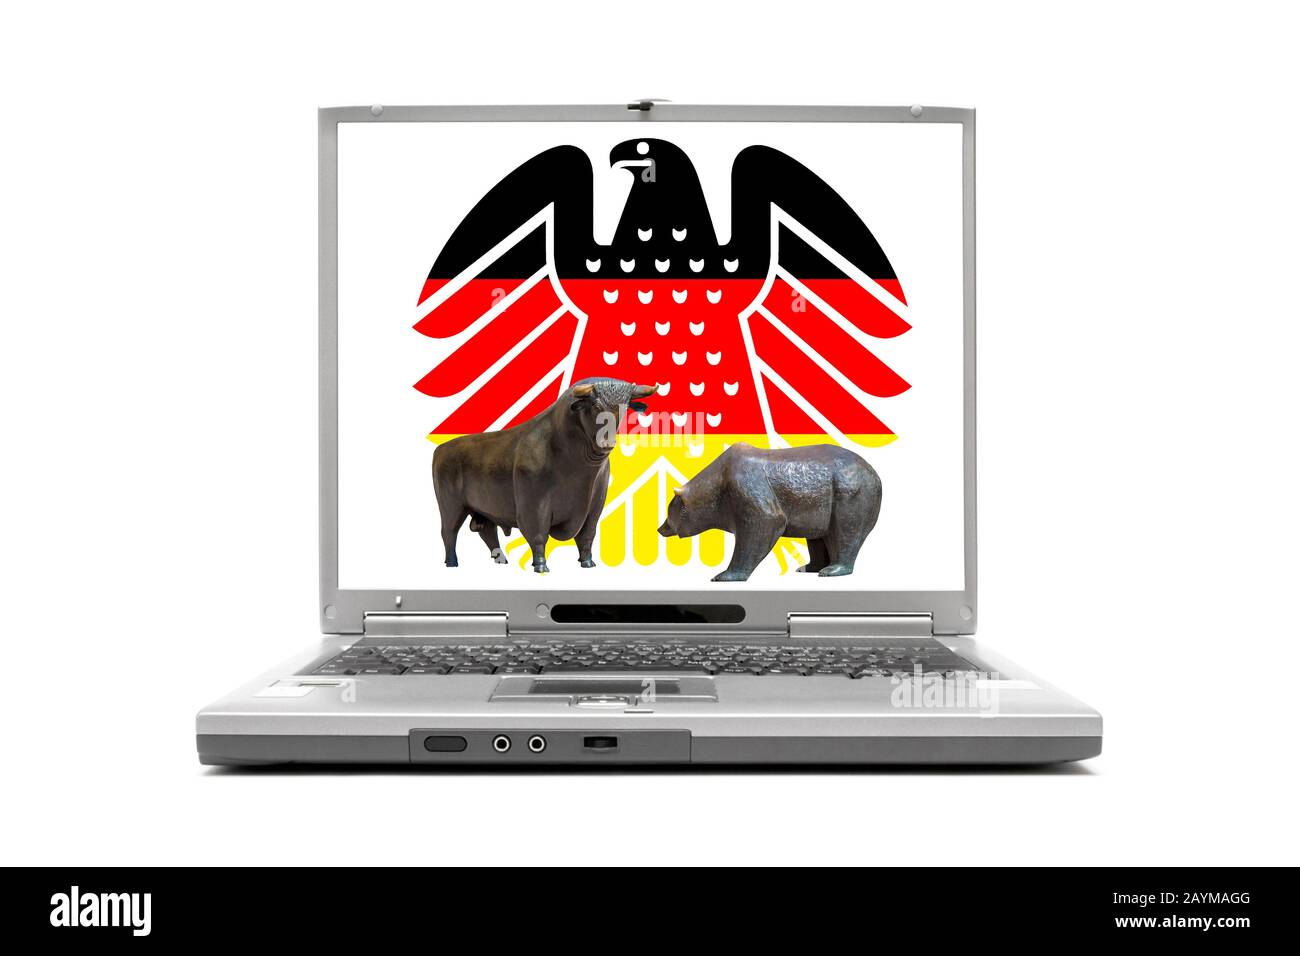 laptop showing federal eagle in German coulors and bull and bear on the display, Germany Stock Photo